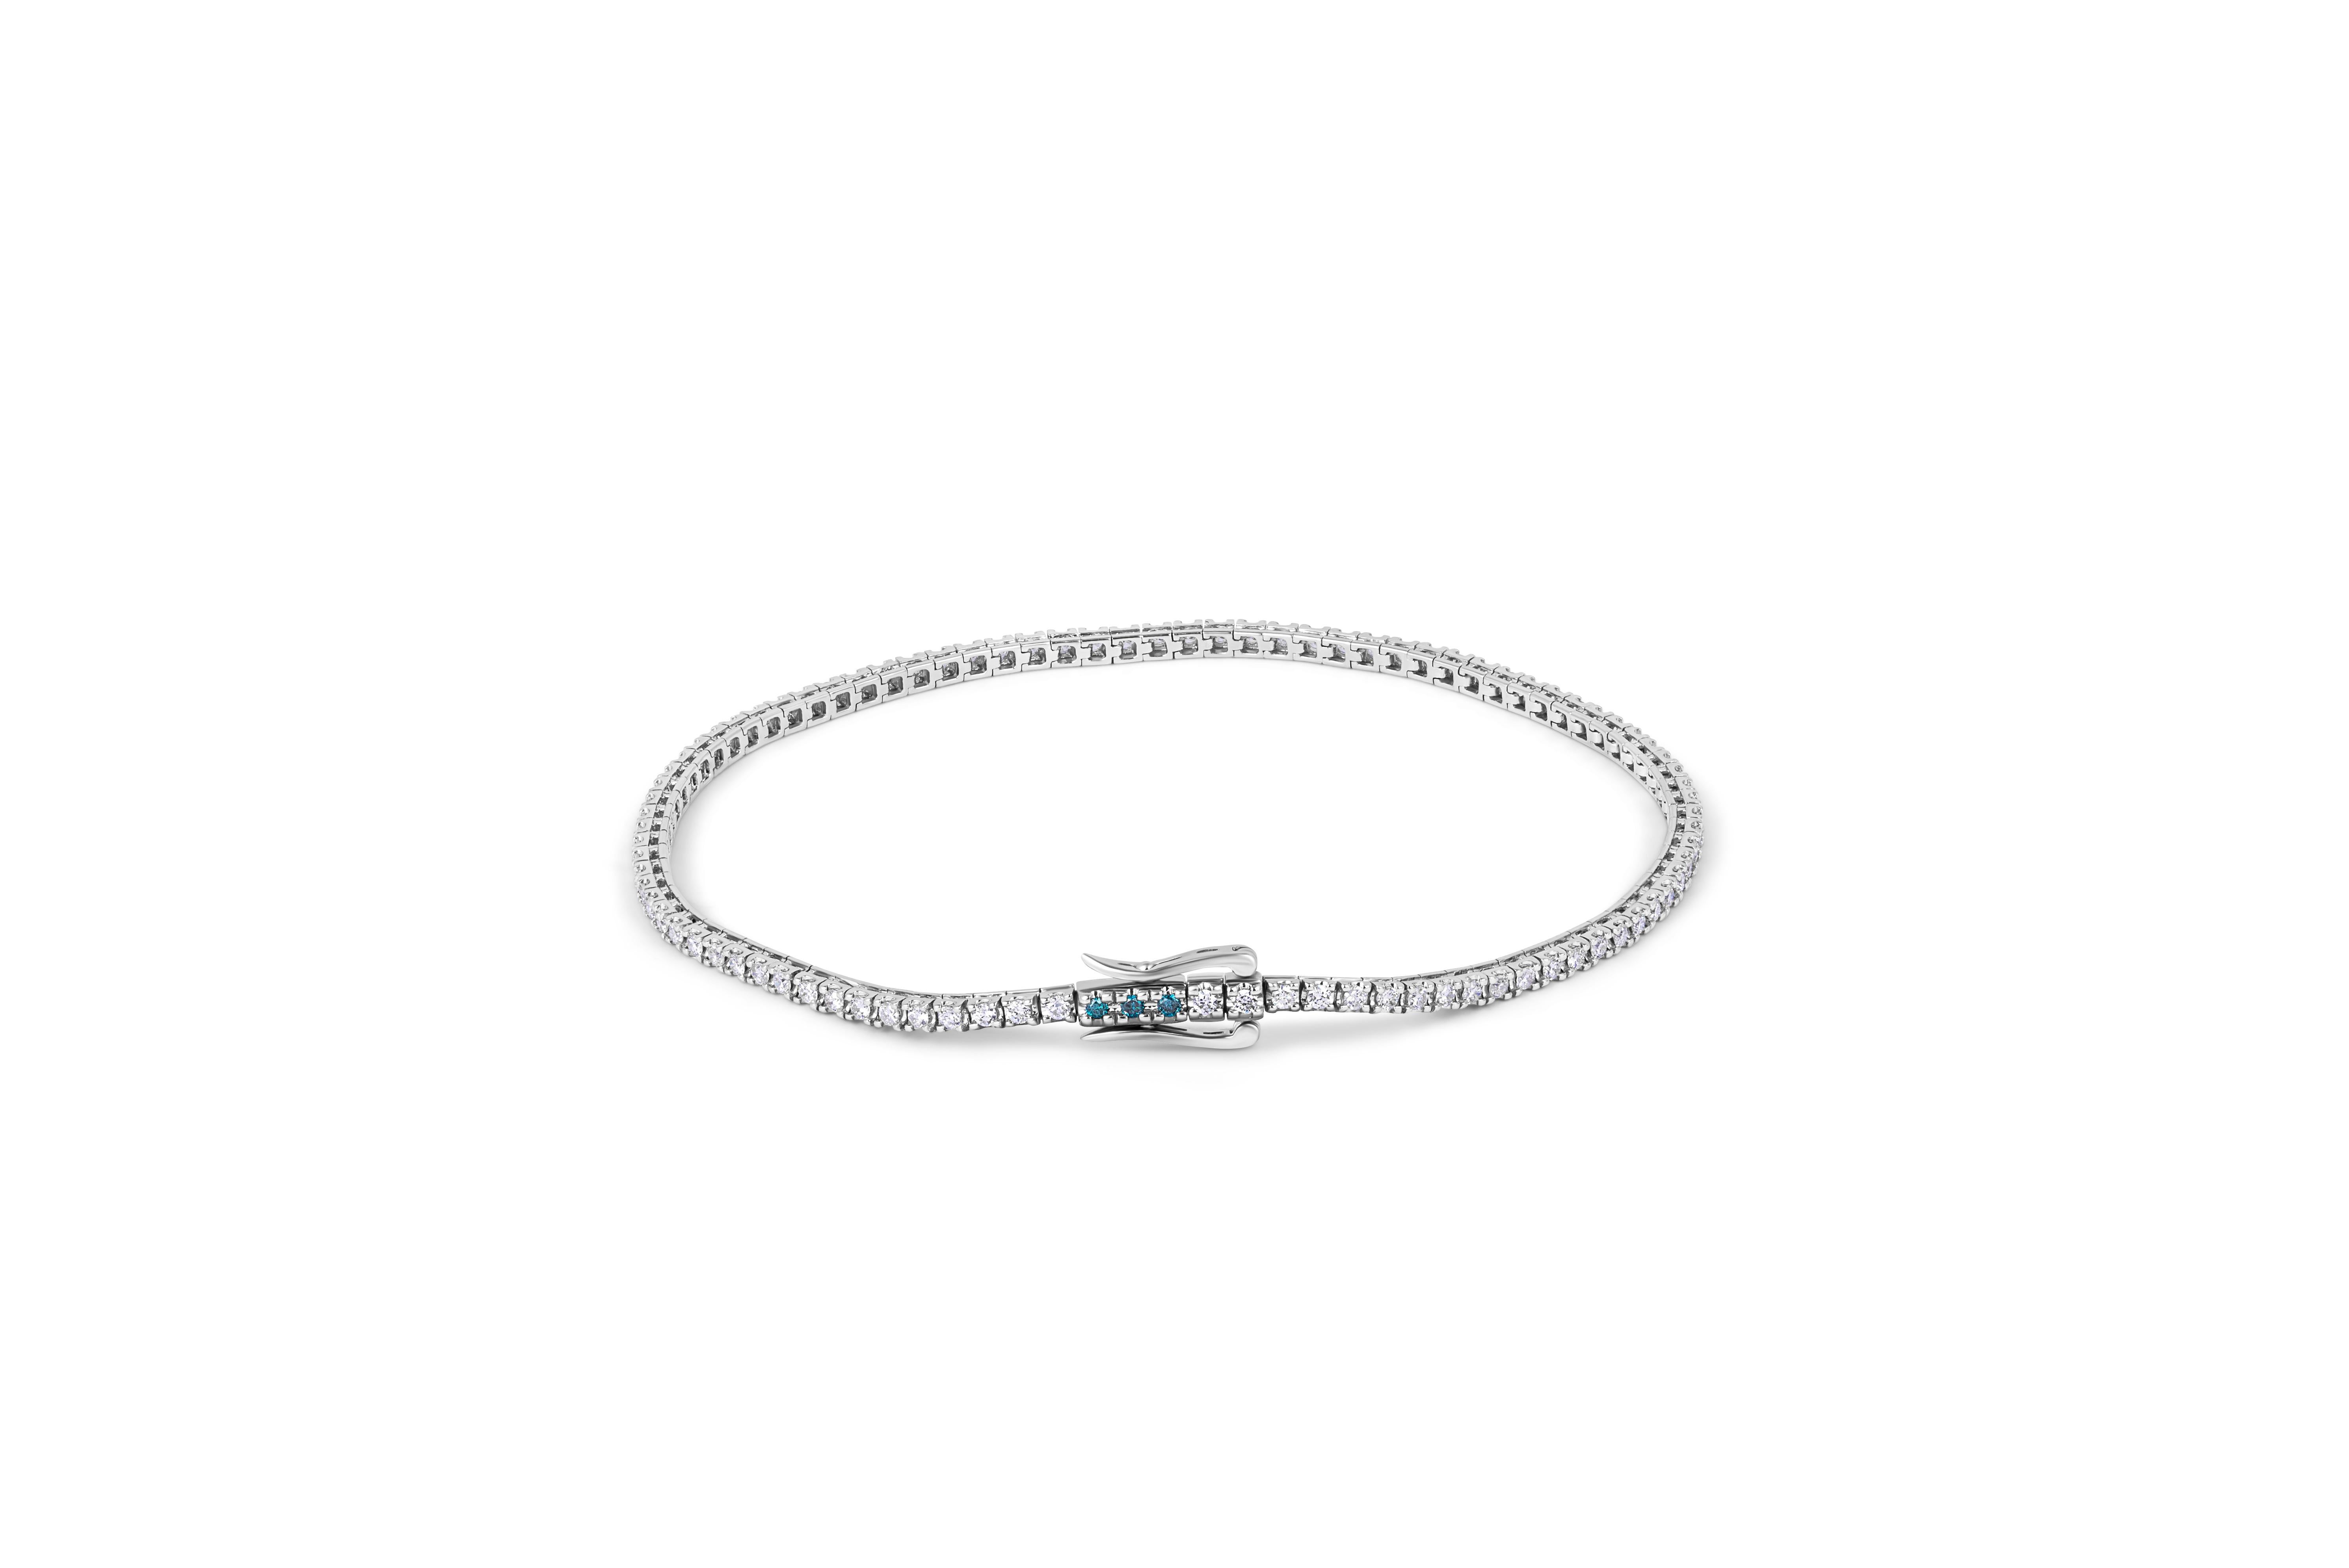 Tateossian continues to explore and find beauty in traditional diamonds which for years have lent themselves to original and pioneering designs. These tennis bracelets feature a wealth of white (GH colour and VS-VVS clarity) diamonds in white gold,